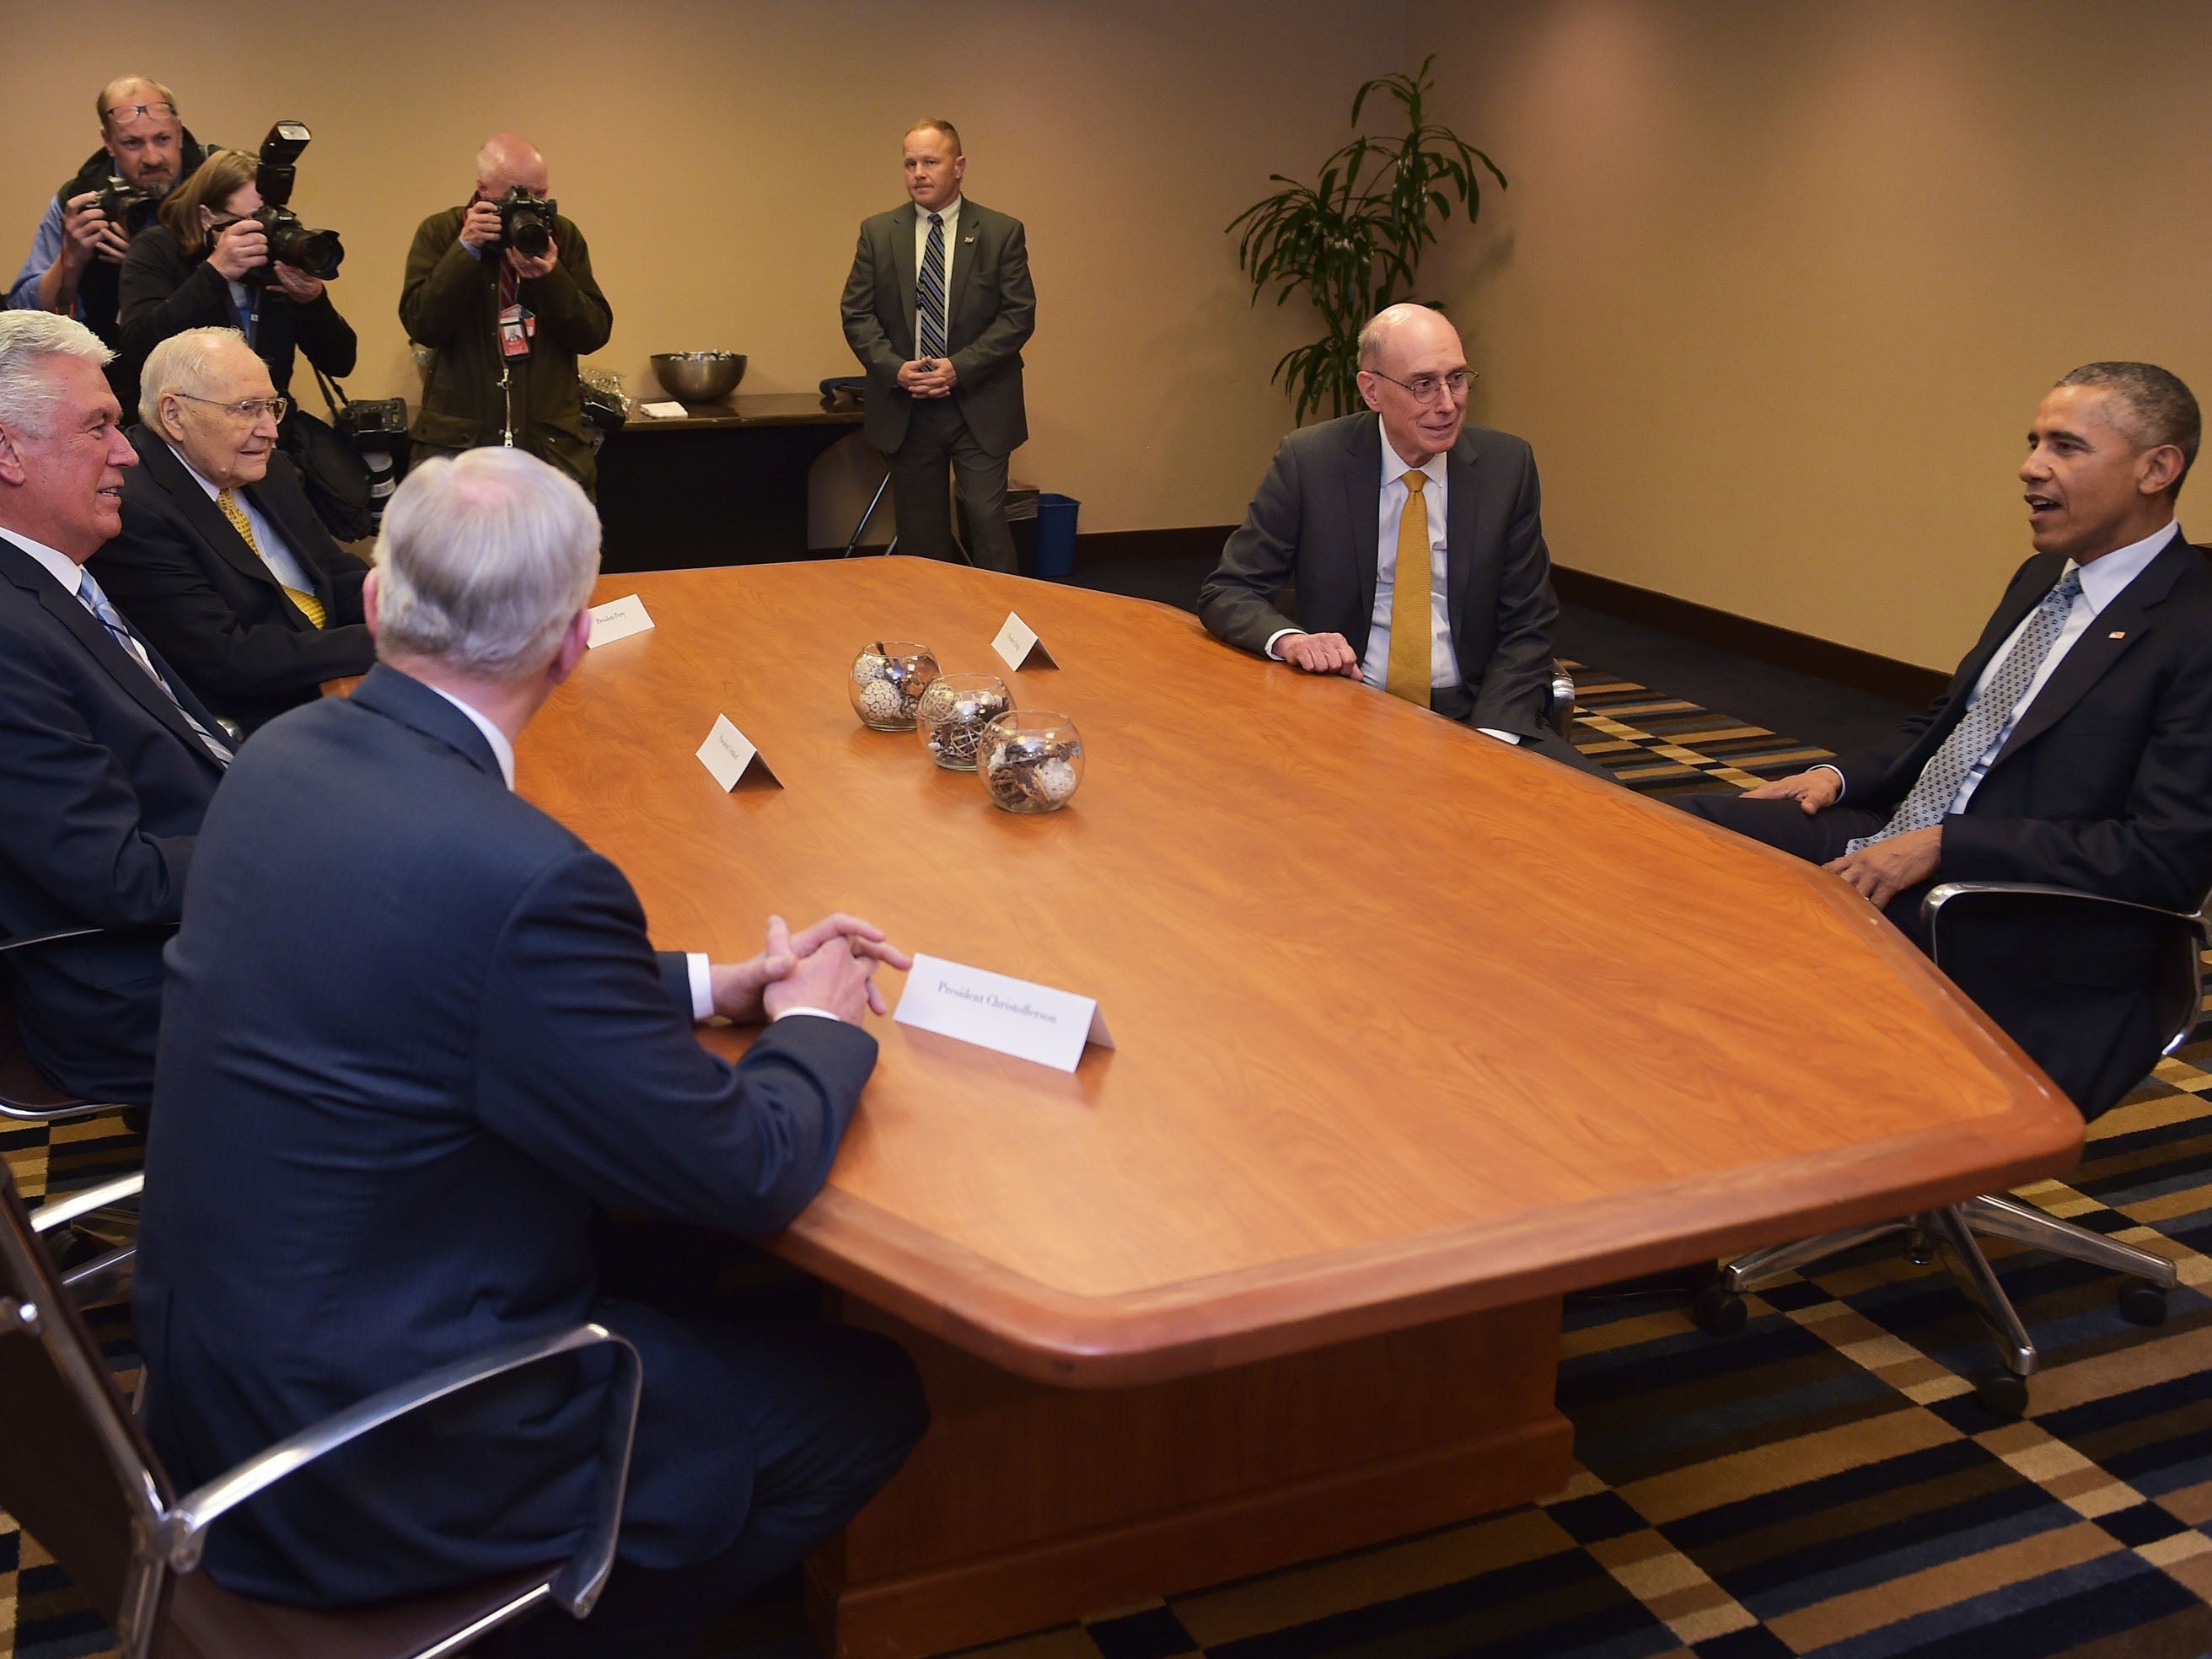 LDS church leaders meet President Obama before the conference